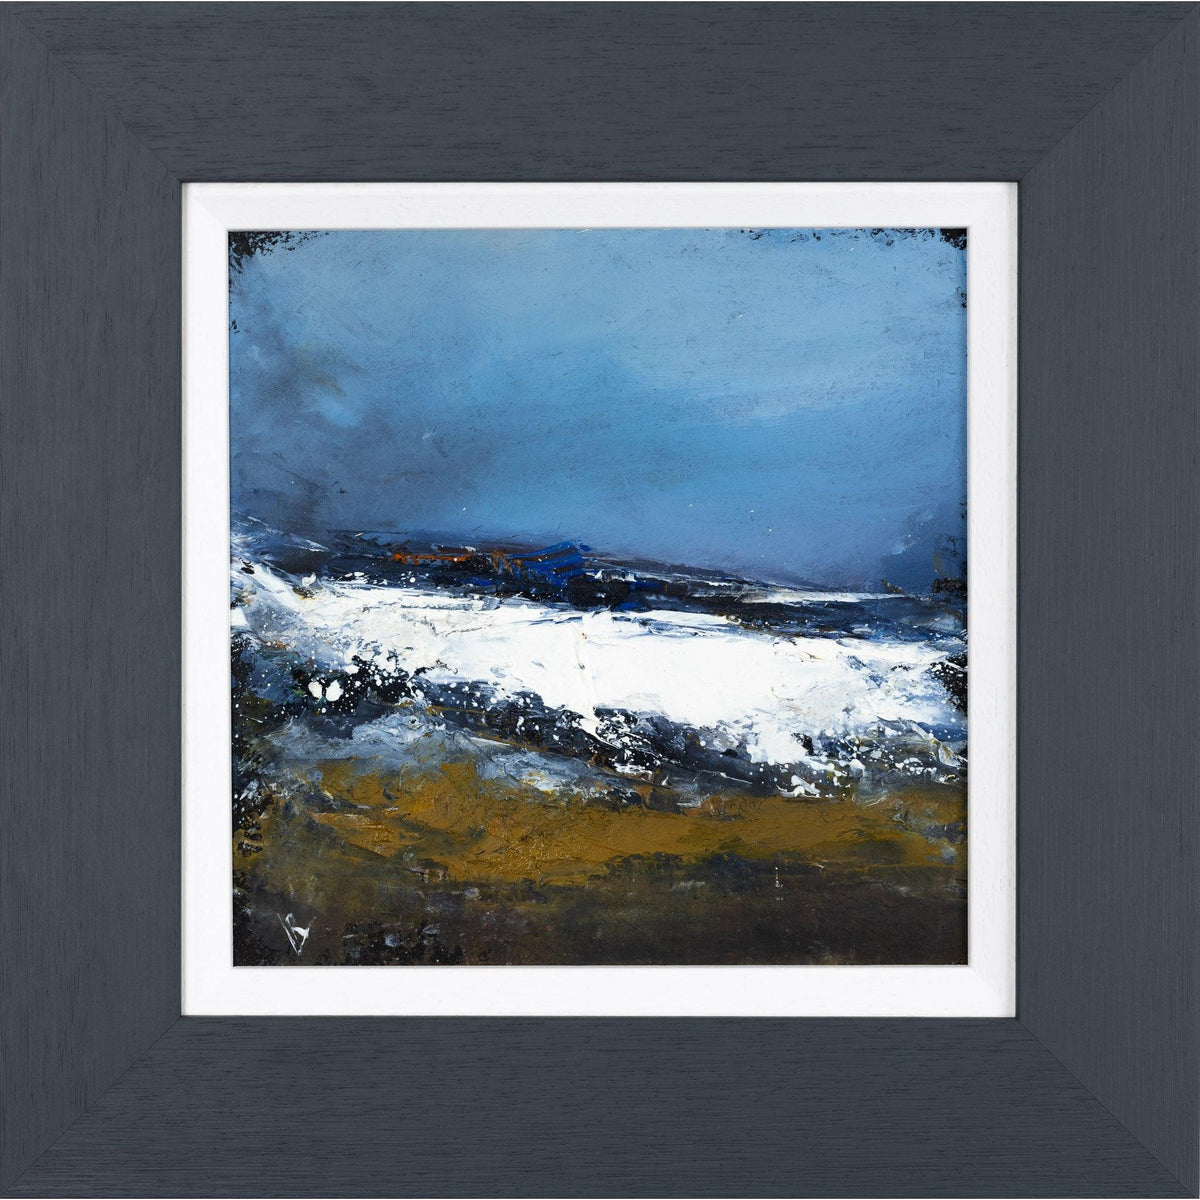 &#39;Changing Tides&#39; oil on board original by Ian Rawnsley, available at Padstow Gallery, Cornwall